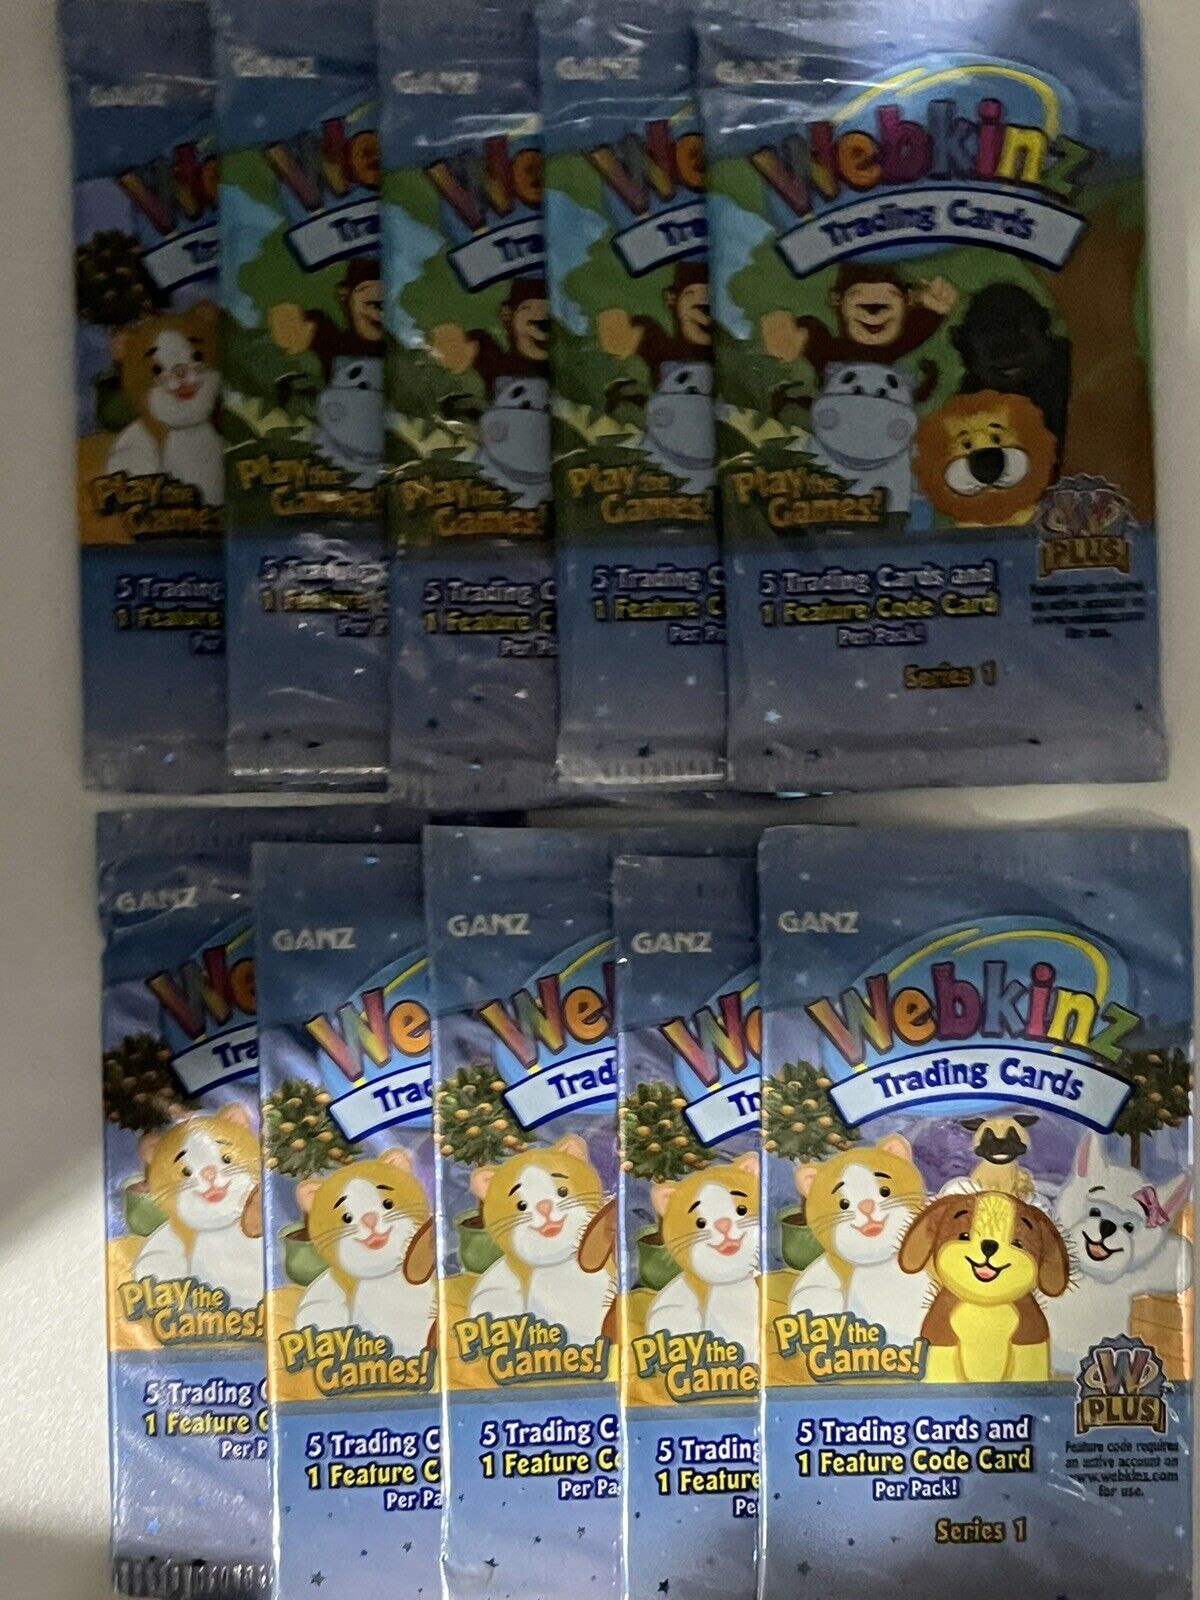 Webkinz Trading Cards Series 1 - LOT OF 10 PACKS -  New Factory Sealed- Stocking Ganz